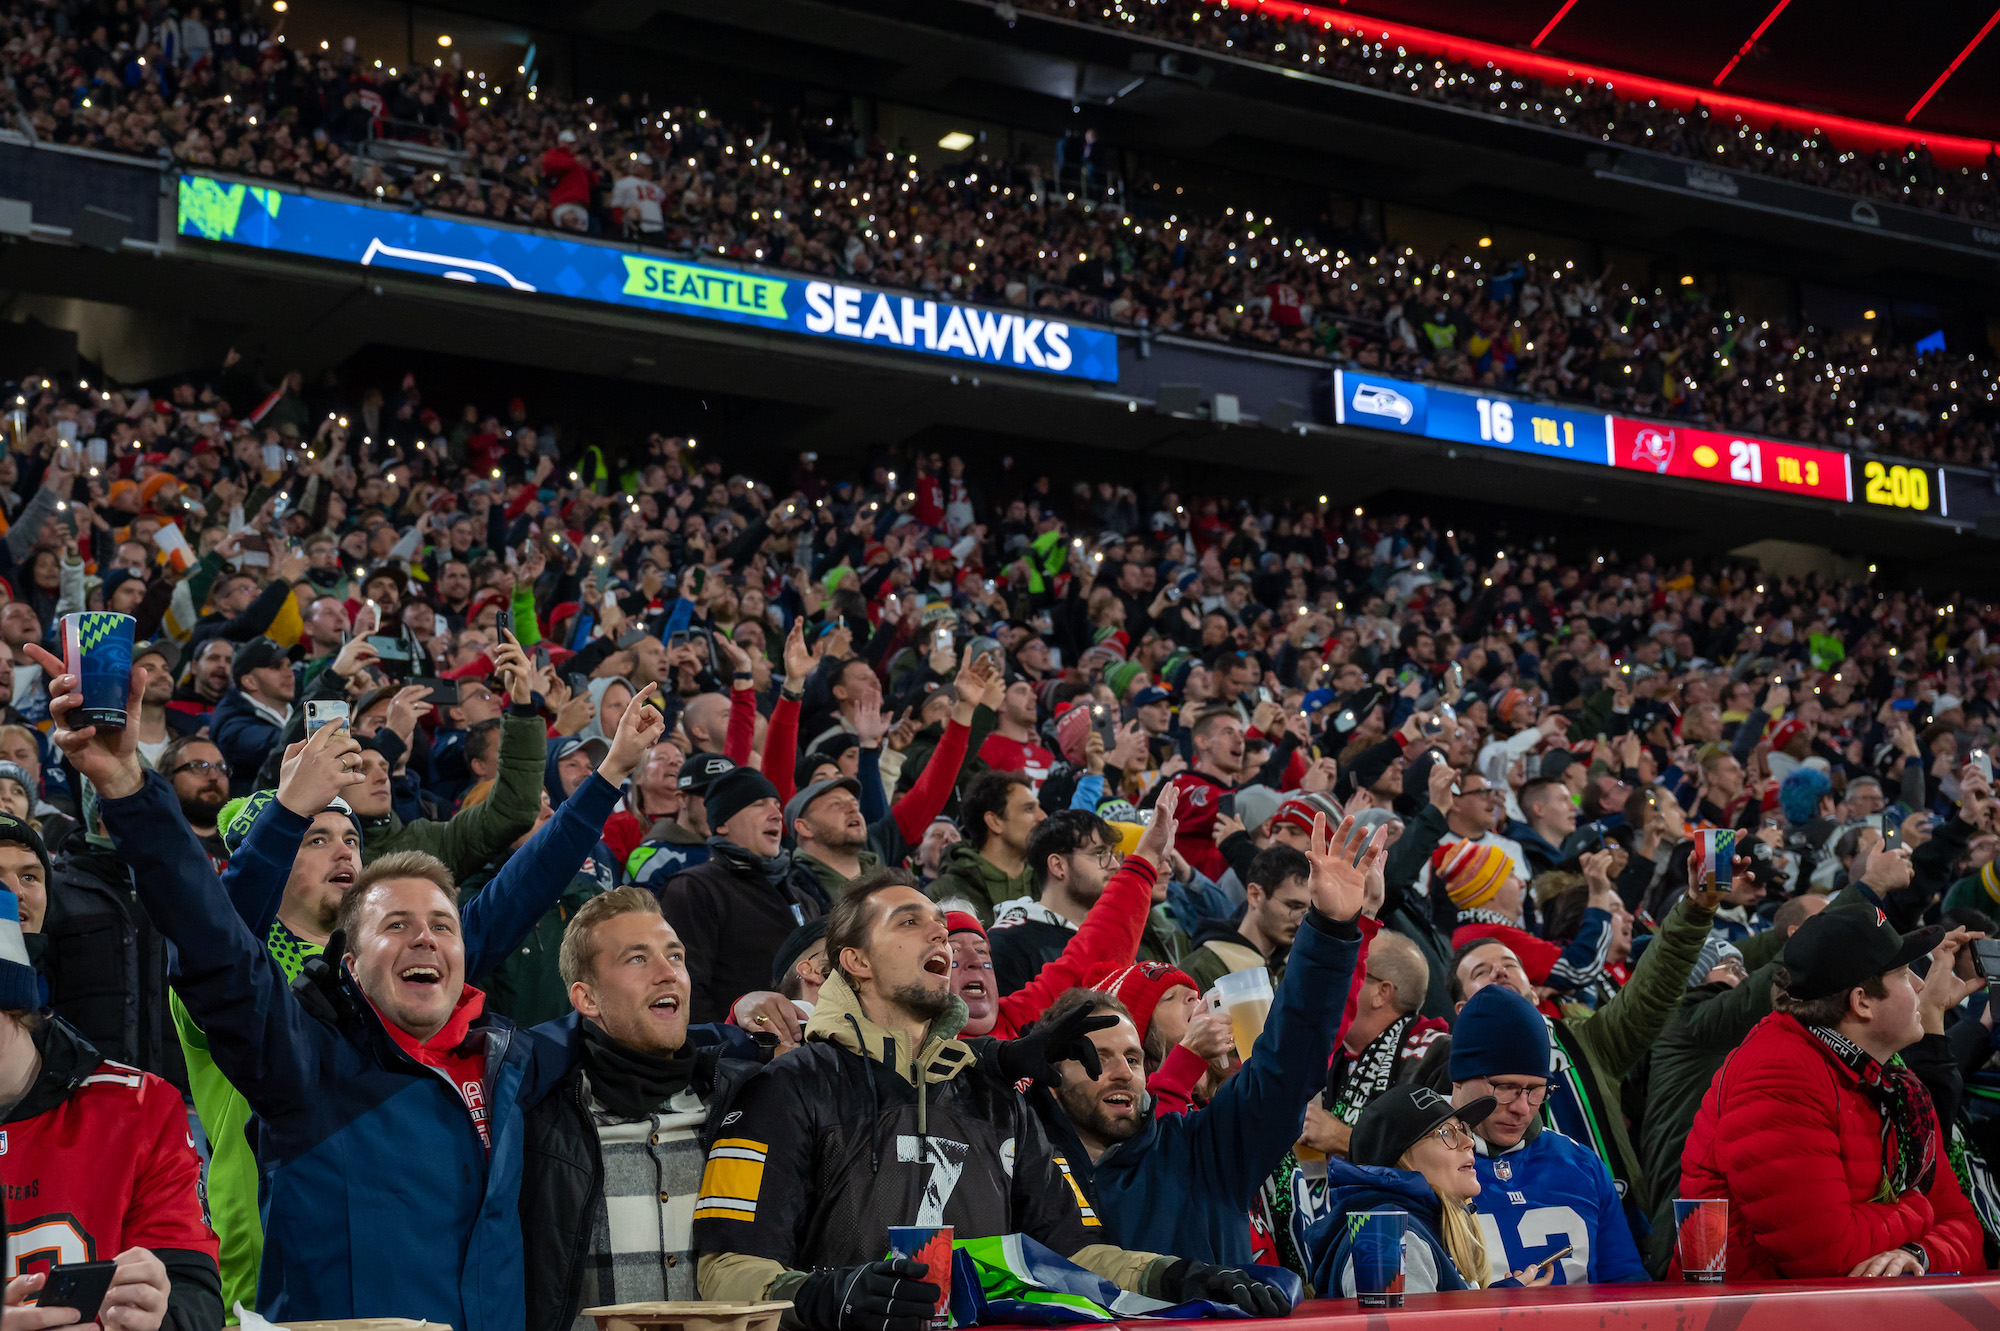 MUNICH, GERMANY - NOVEMBER 13: Fans cheer during the NFL match between Seattle Seahawks and Tampa Bay Buccaneers at Allianz Arena on November 13, 2022 in Munich, Germany. (Photo by Sebastian Widmann/Getty Images)